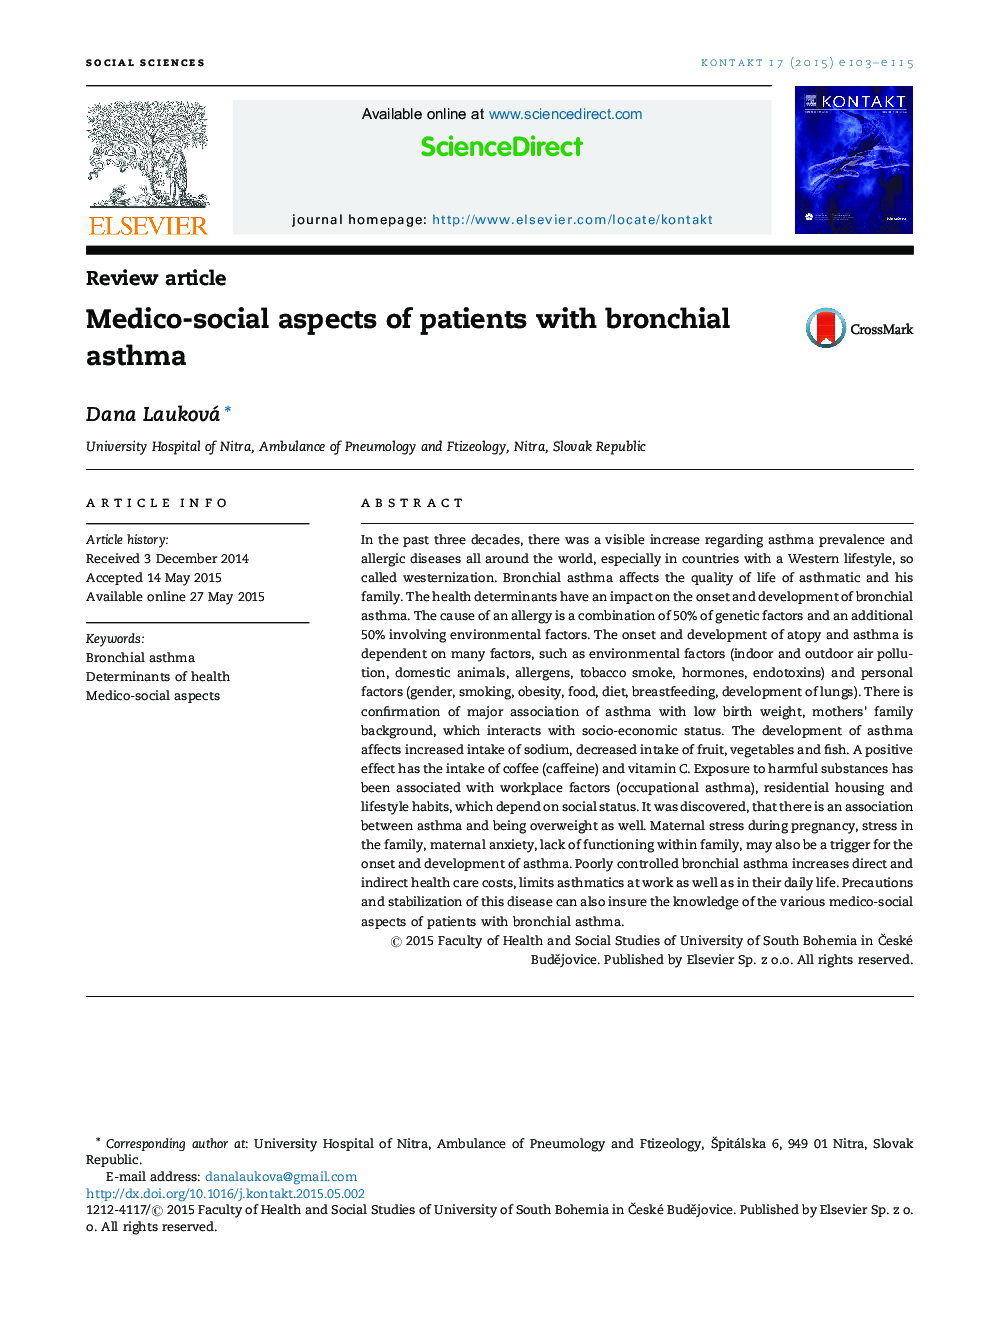 Medico-social aspects of patients with bronchial asthma